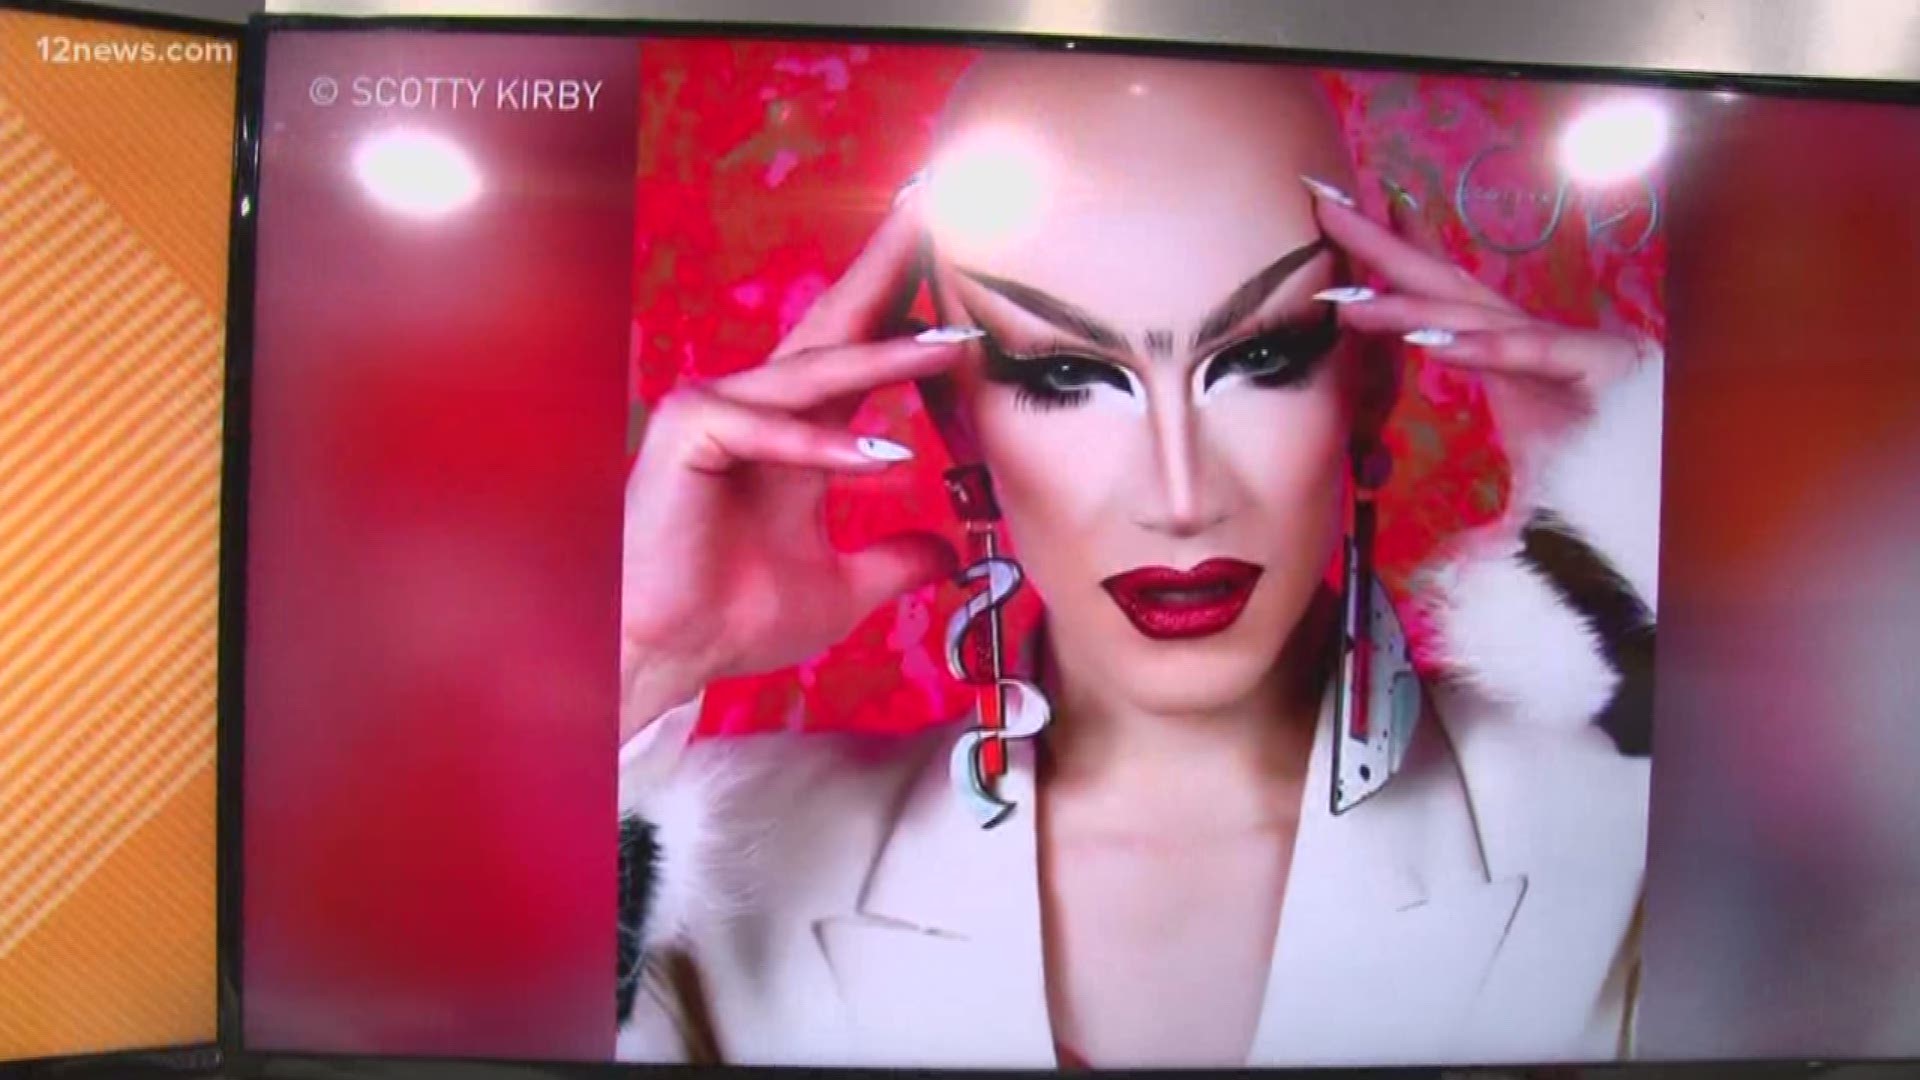 Phoenix photographer Scoty Kirby began shooting queens five years ago. Today he is known for his snap shot skills thanks in part to the contestants on RuPaul's Drag Race.